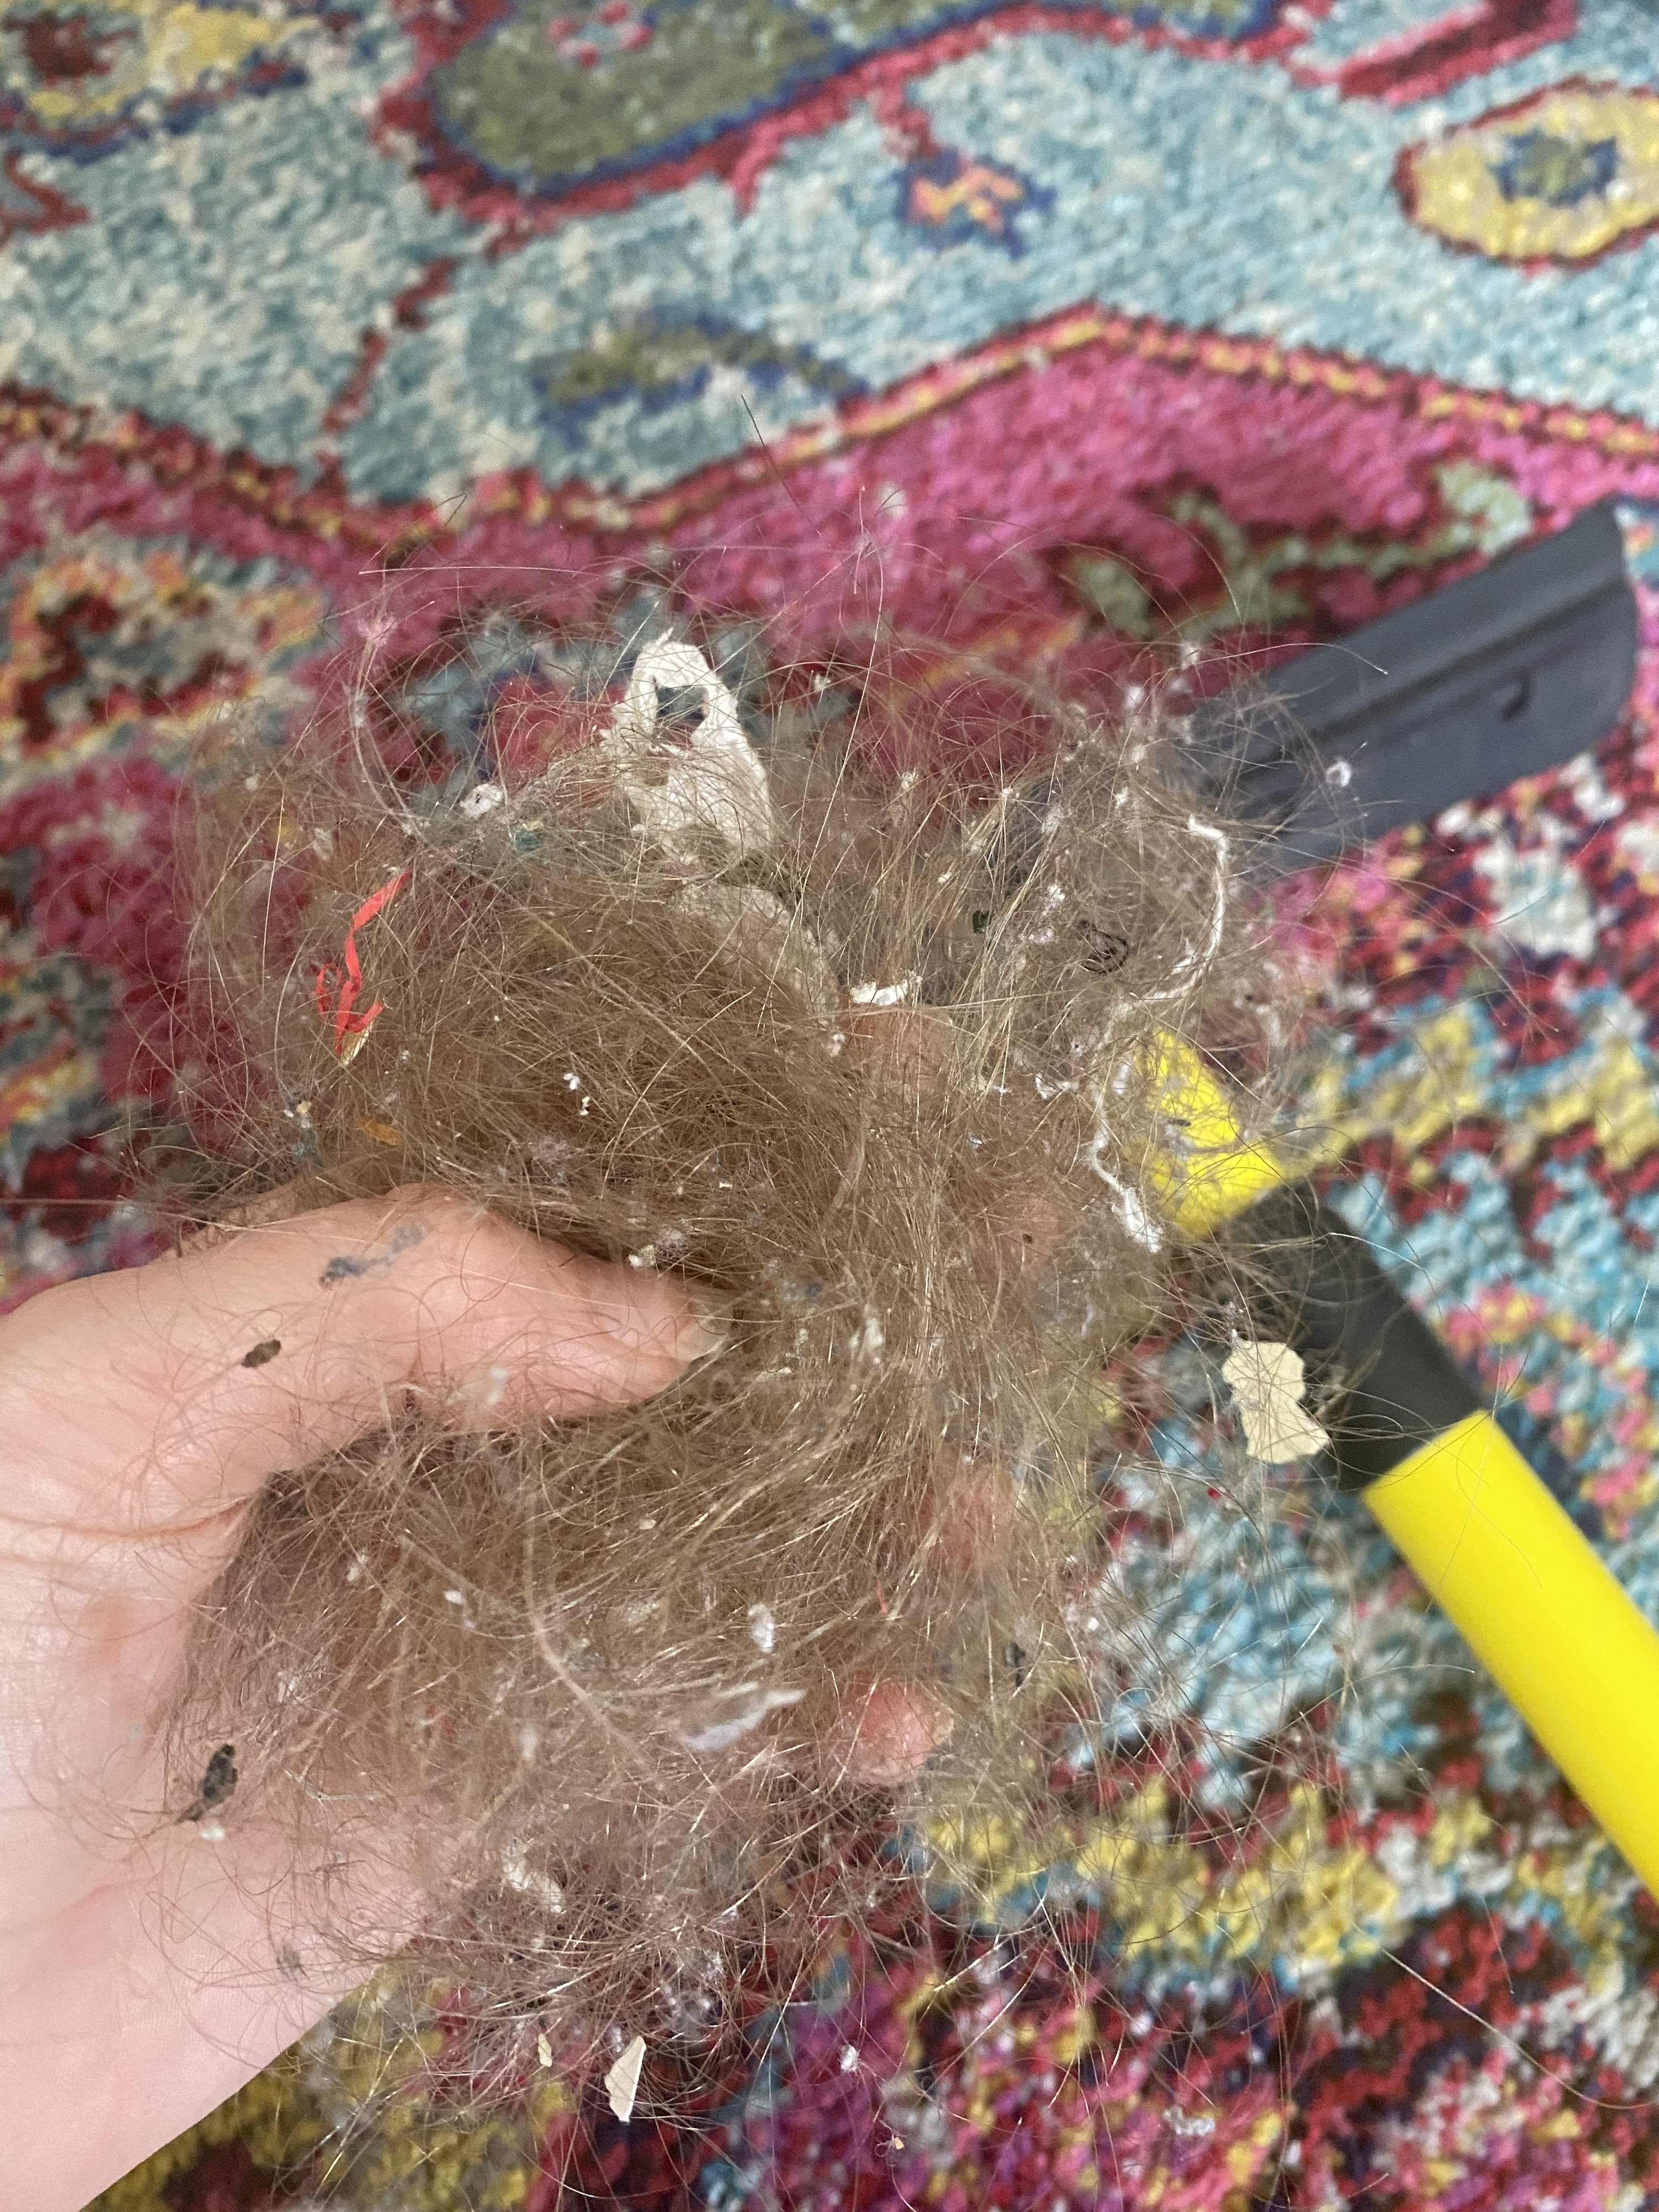 Very gross giant gob of hair with debris in it 